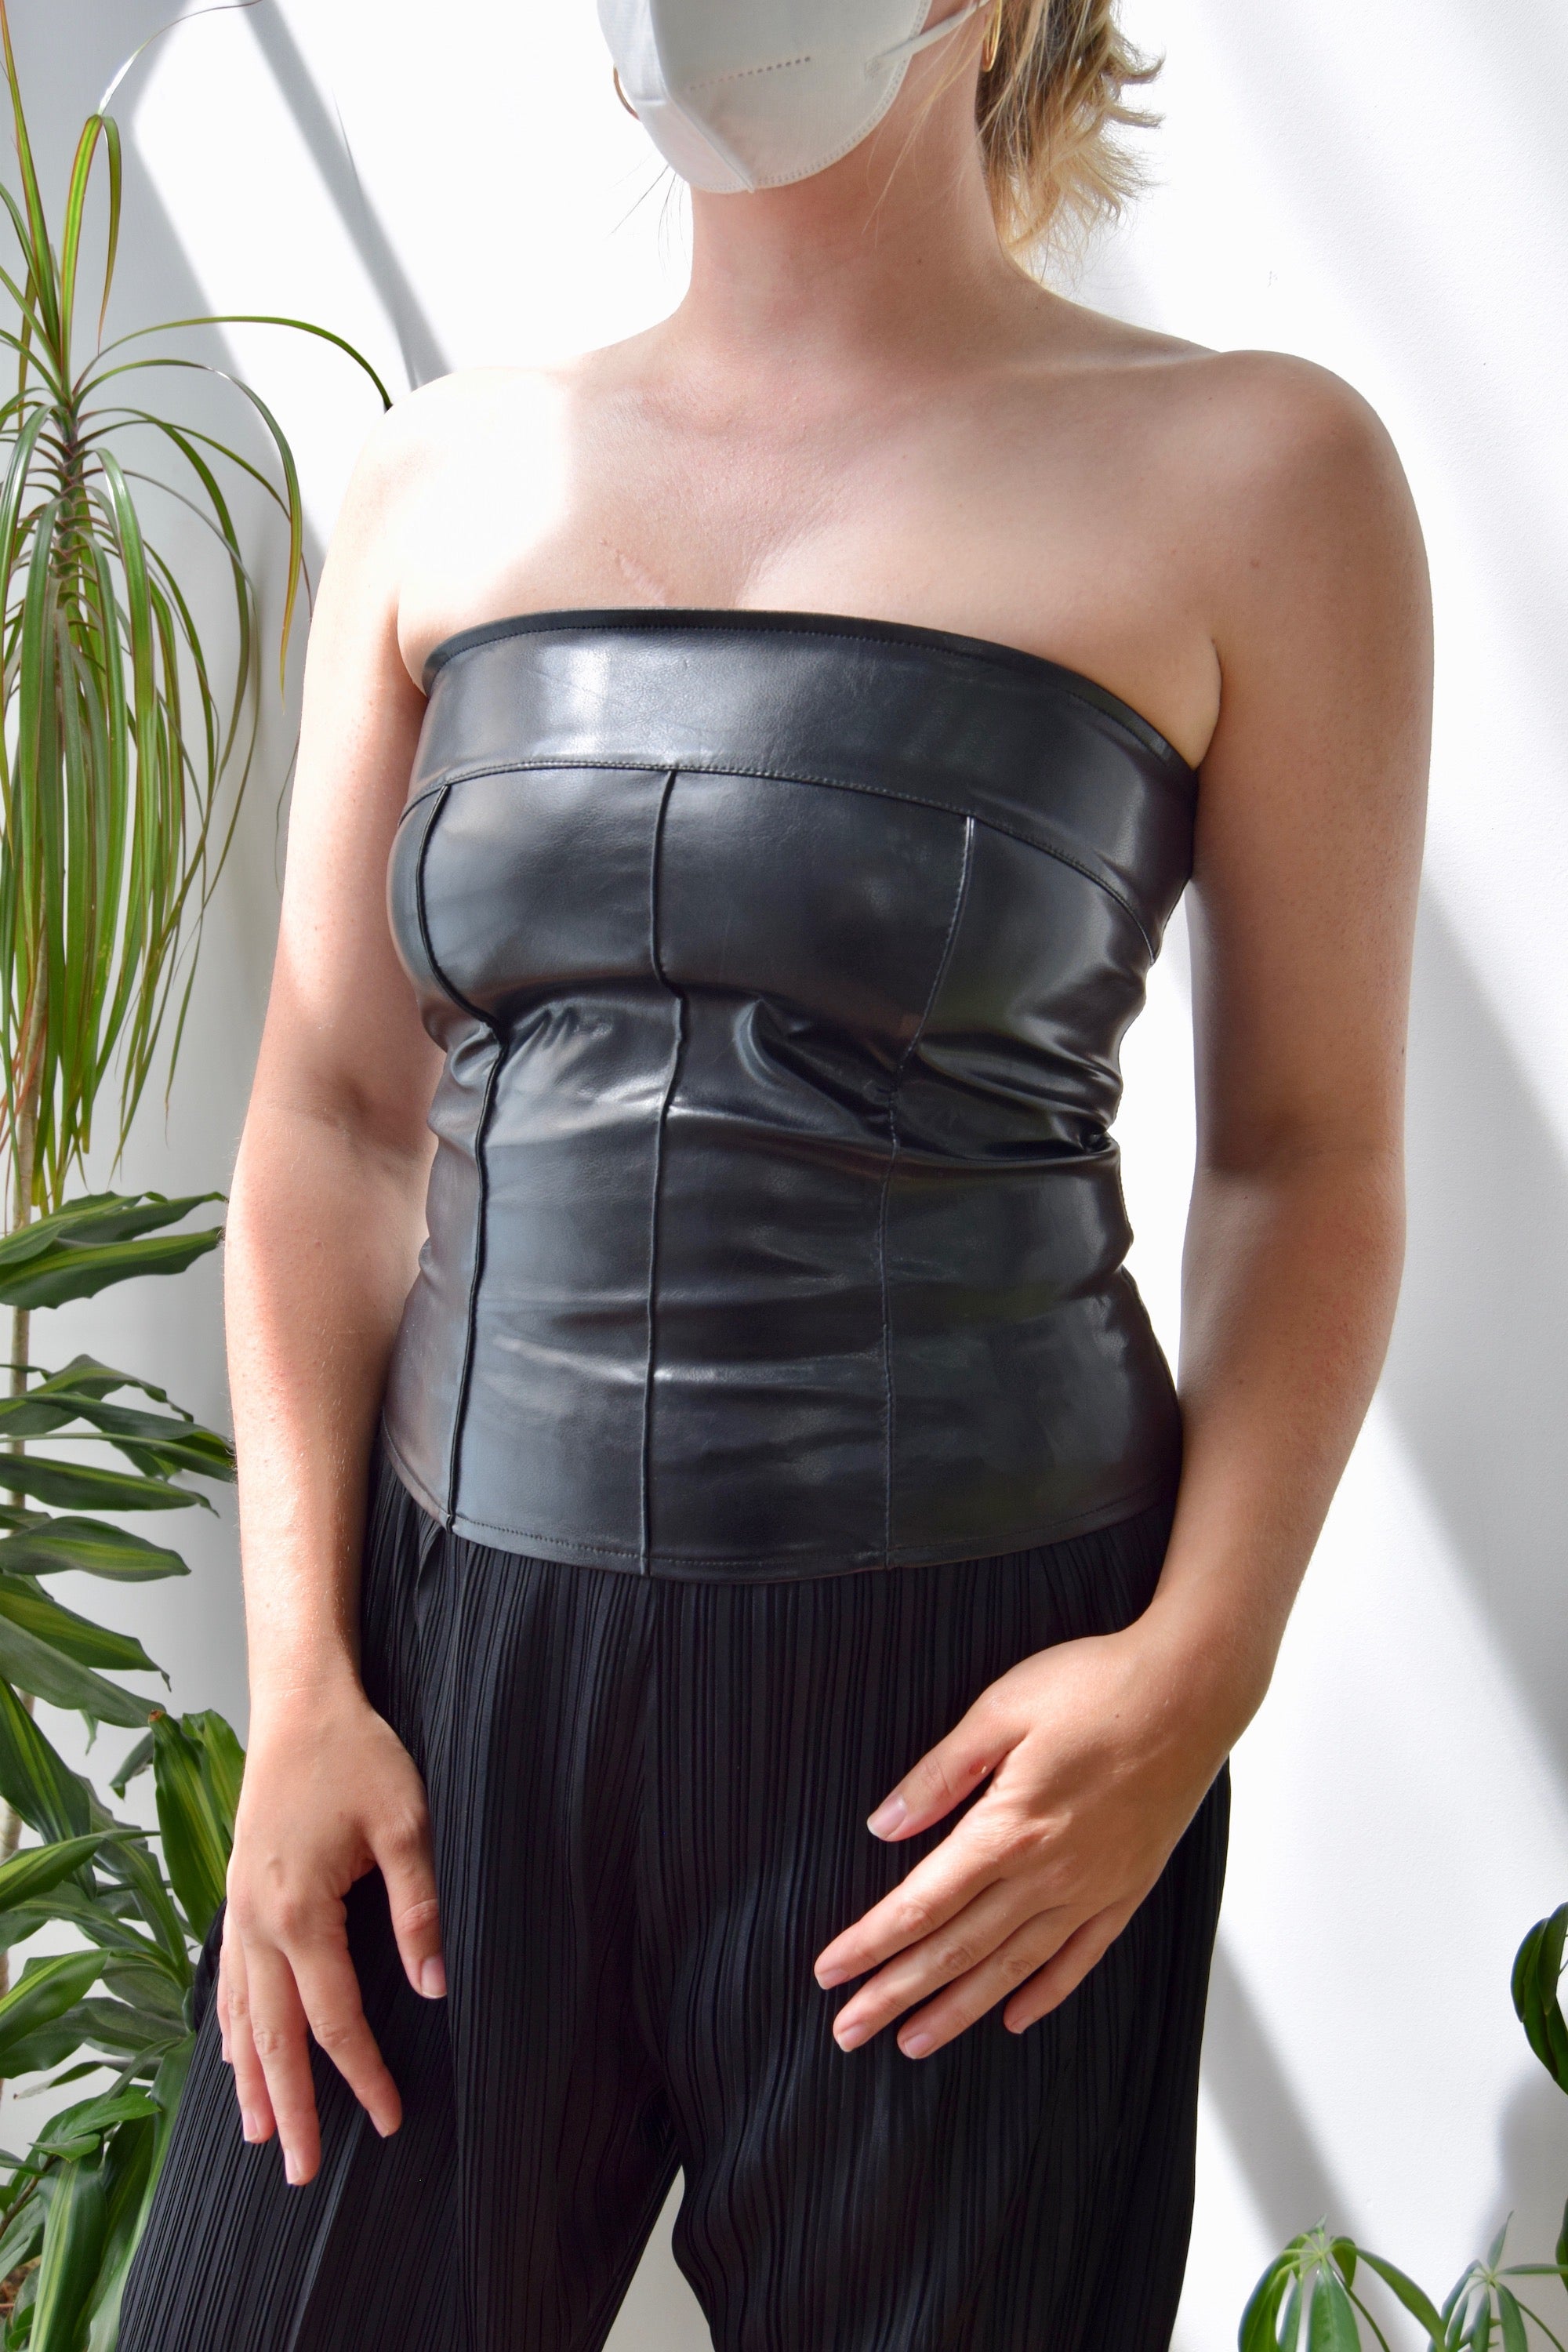 00's Pleather Bustier